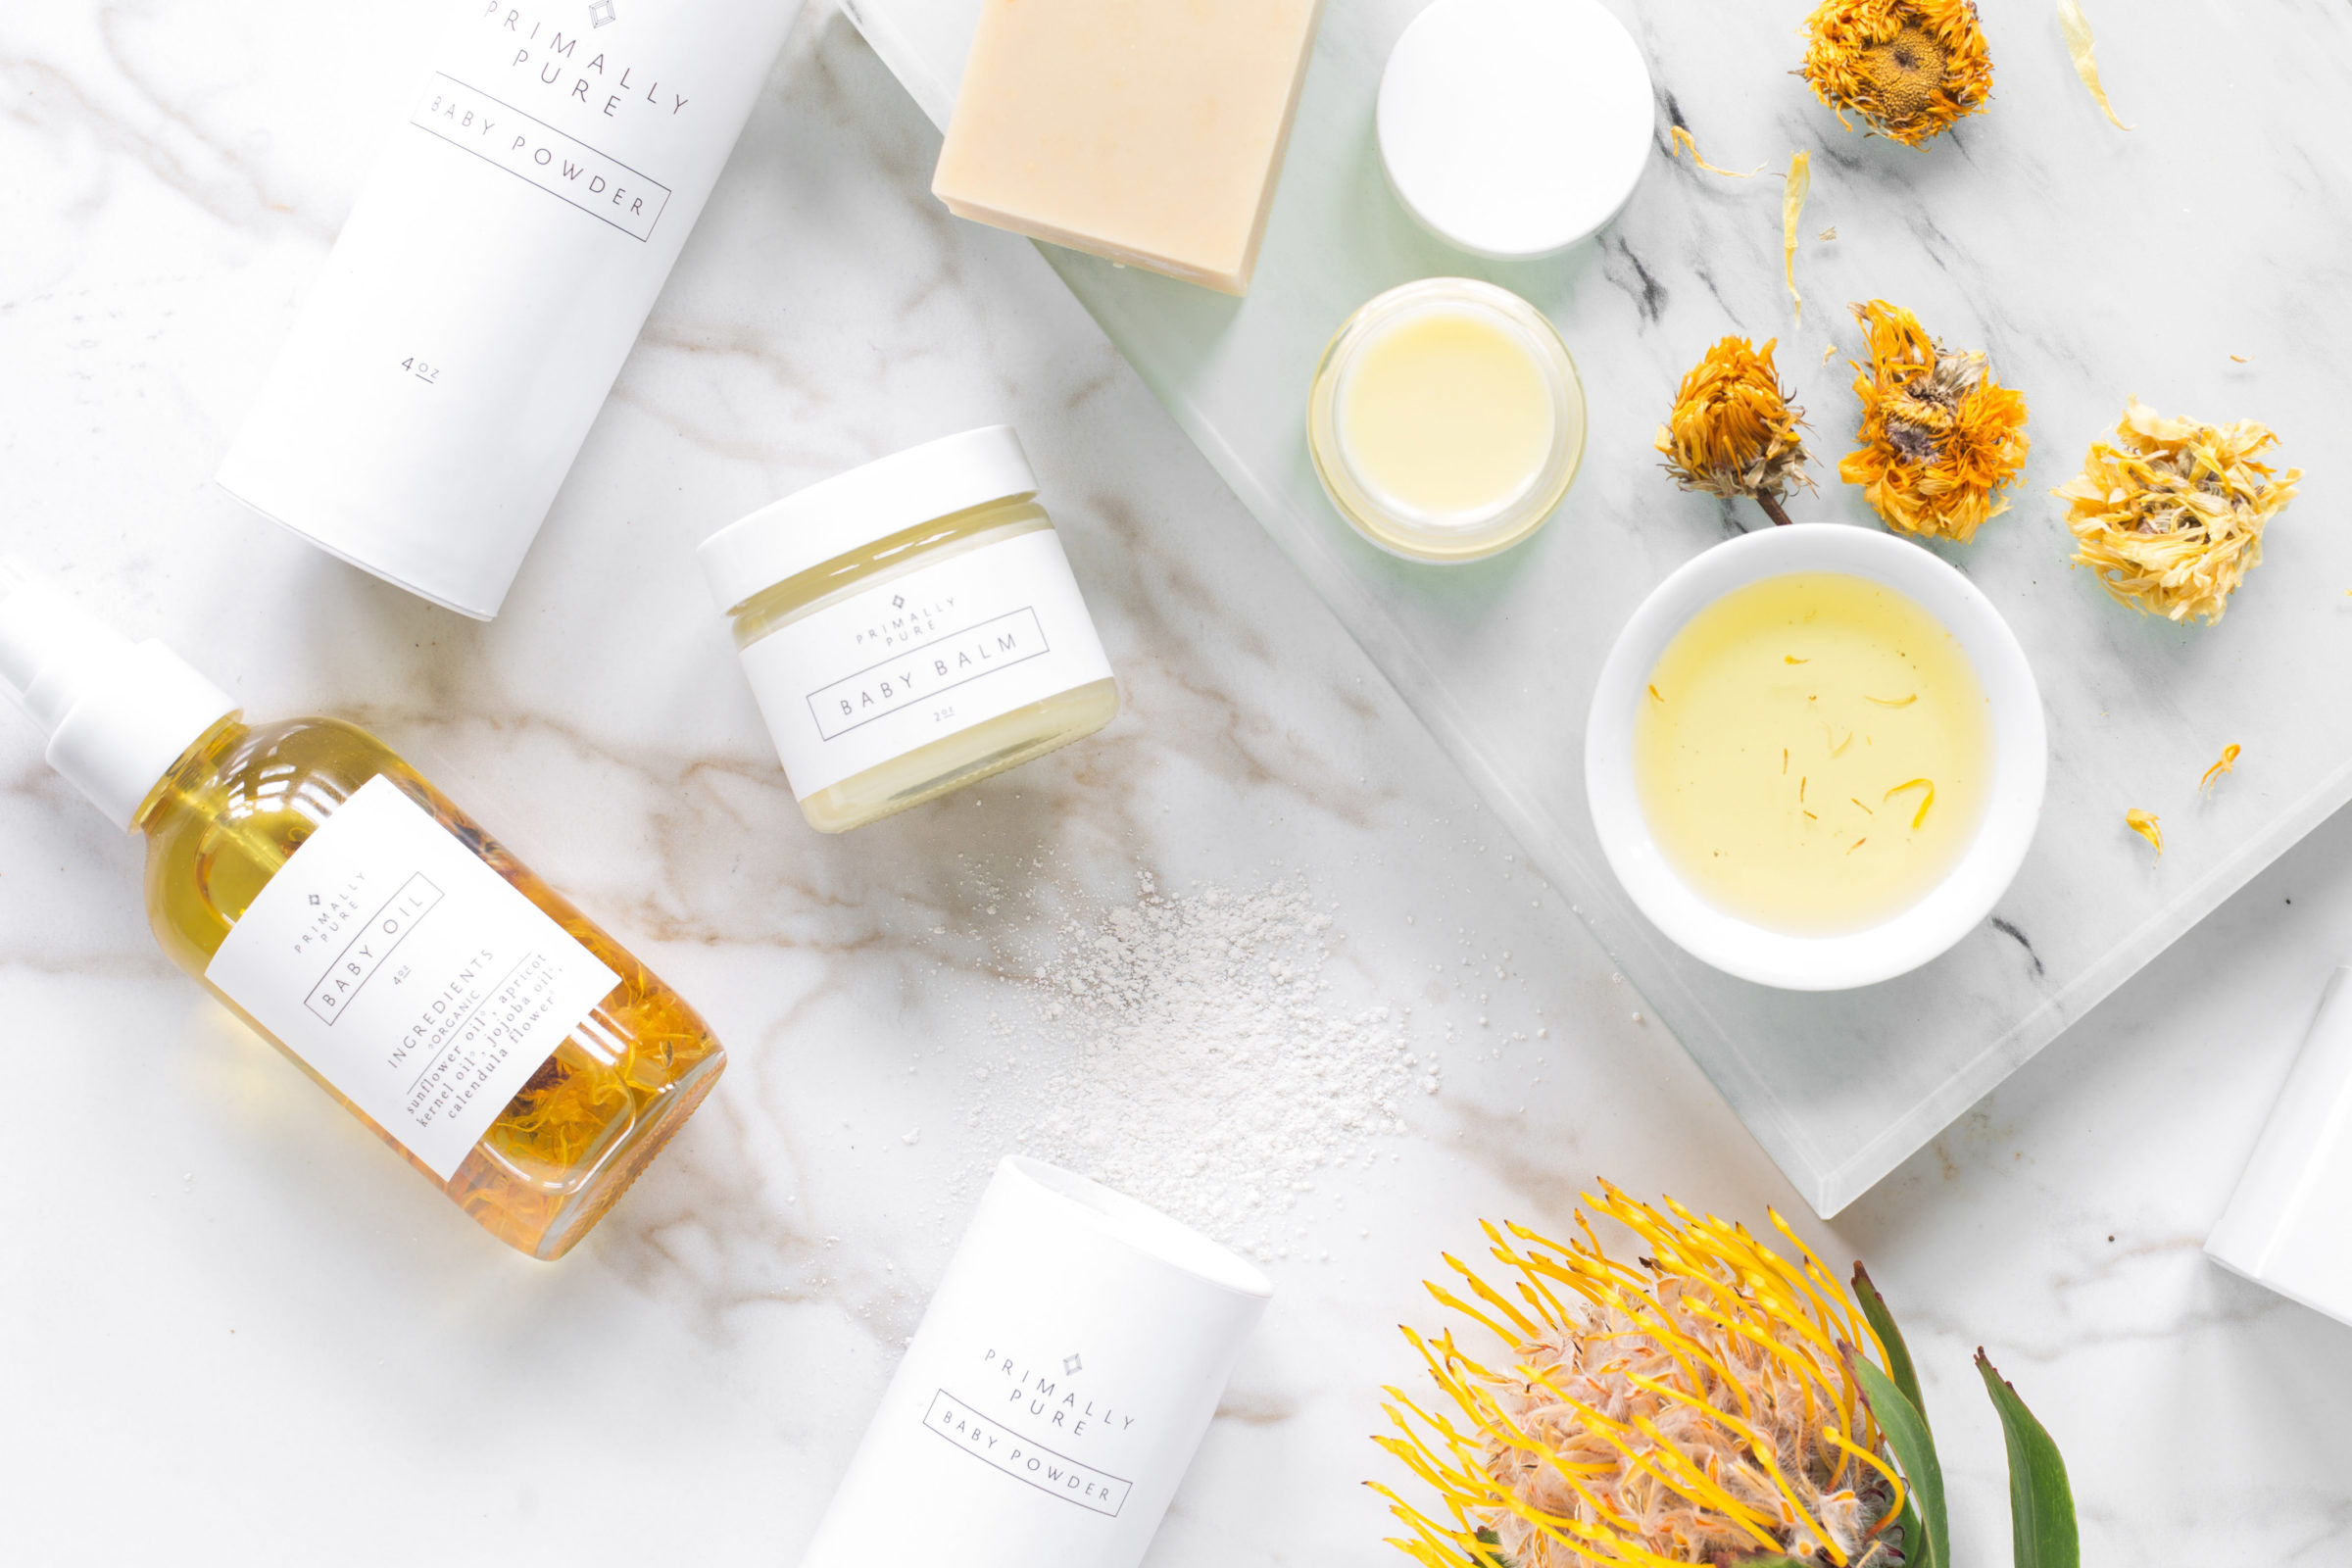 Newborn, family and children's photographer, Helena Woods, shares the BEST All Natural Non-Toxic Skincare Products for Pregnant Moms Primally Pure